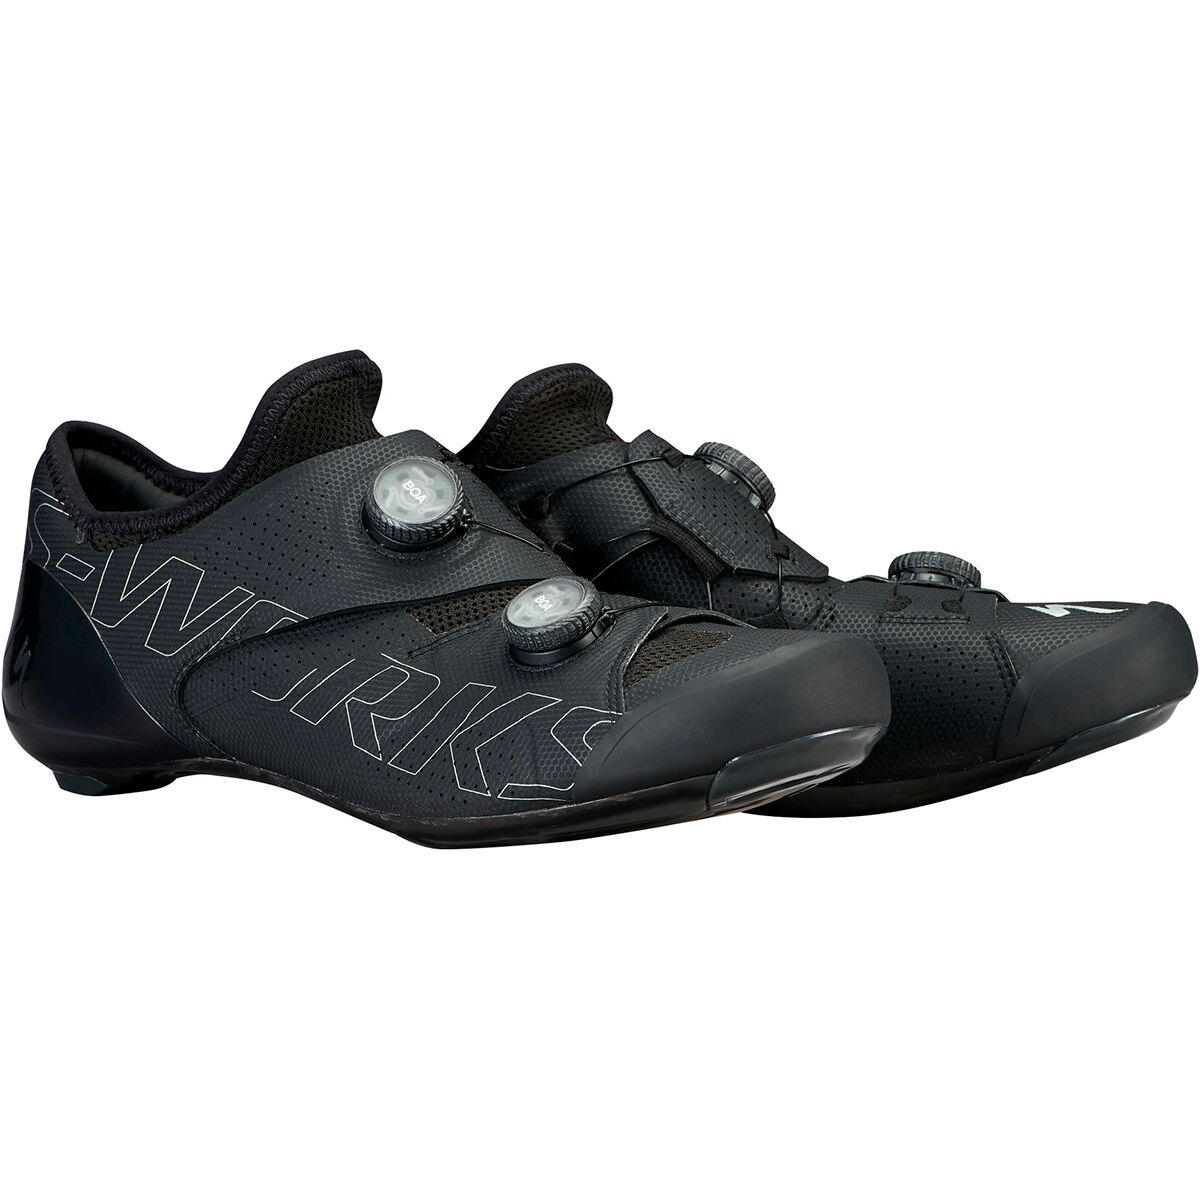 Specialized S-Works Ares Road Shoe - Men's | Competitive Cyclist